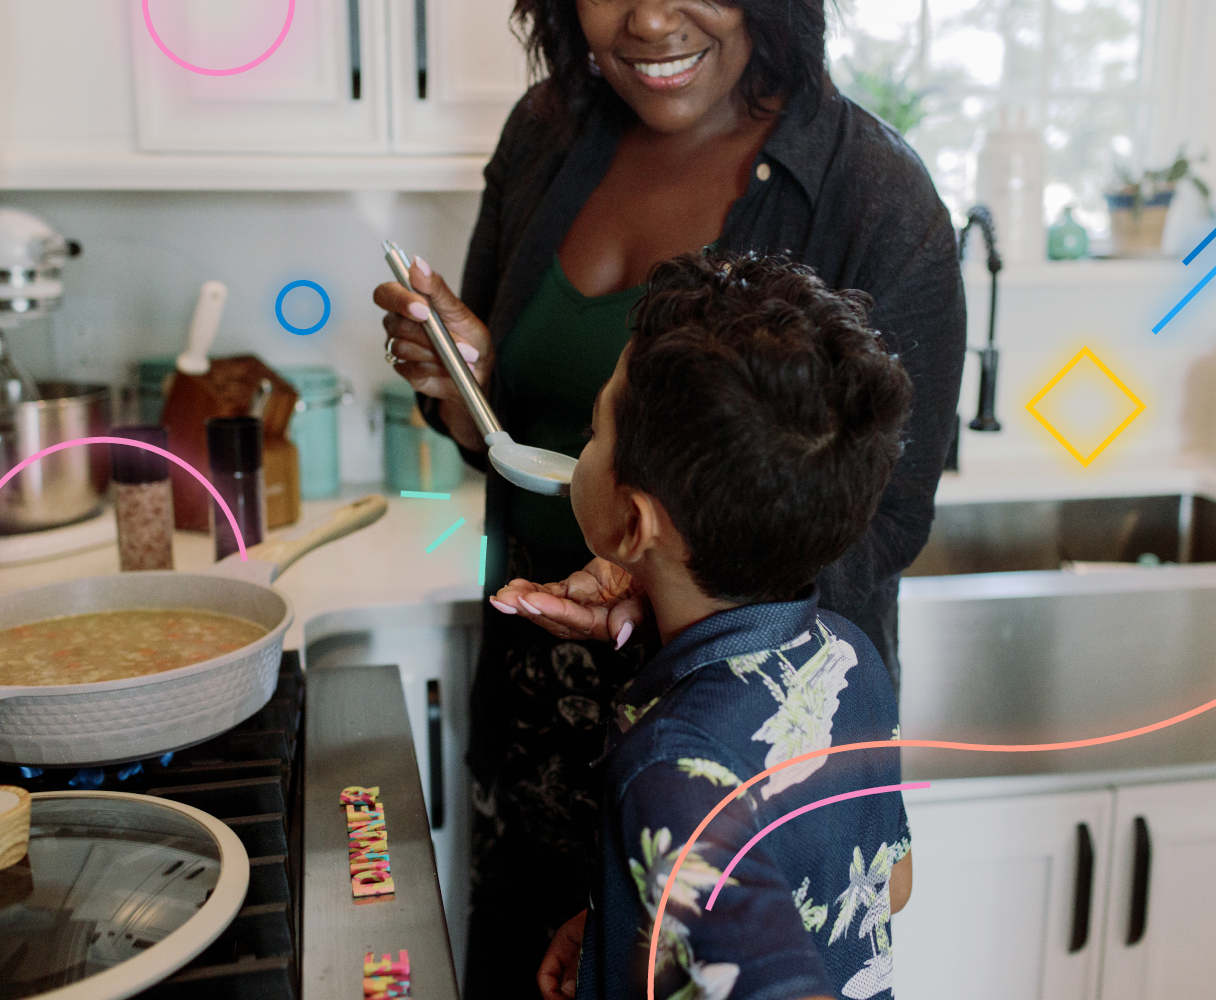 Smiling mother with work flexibility cooks with her child in kitchen